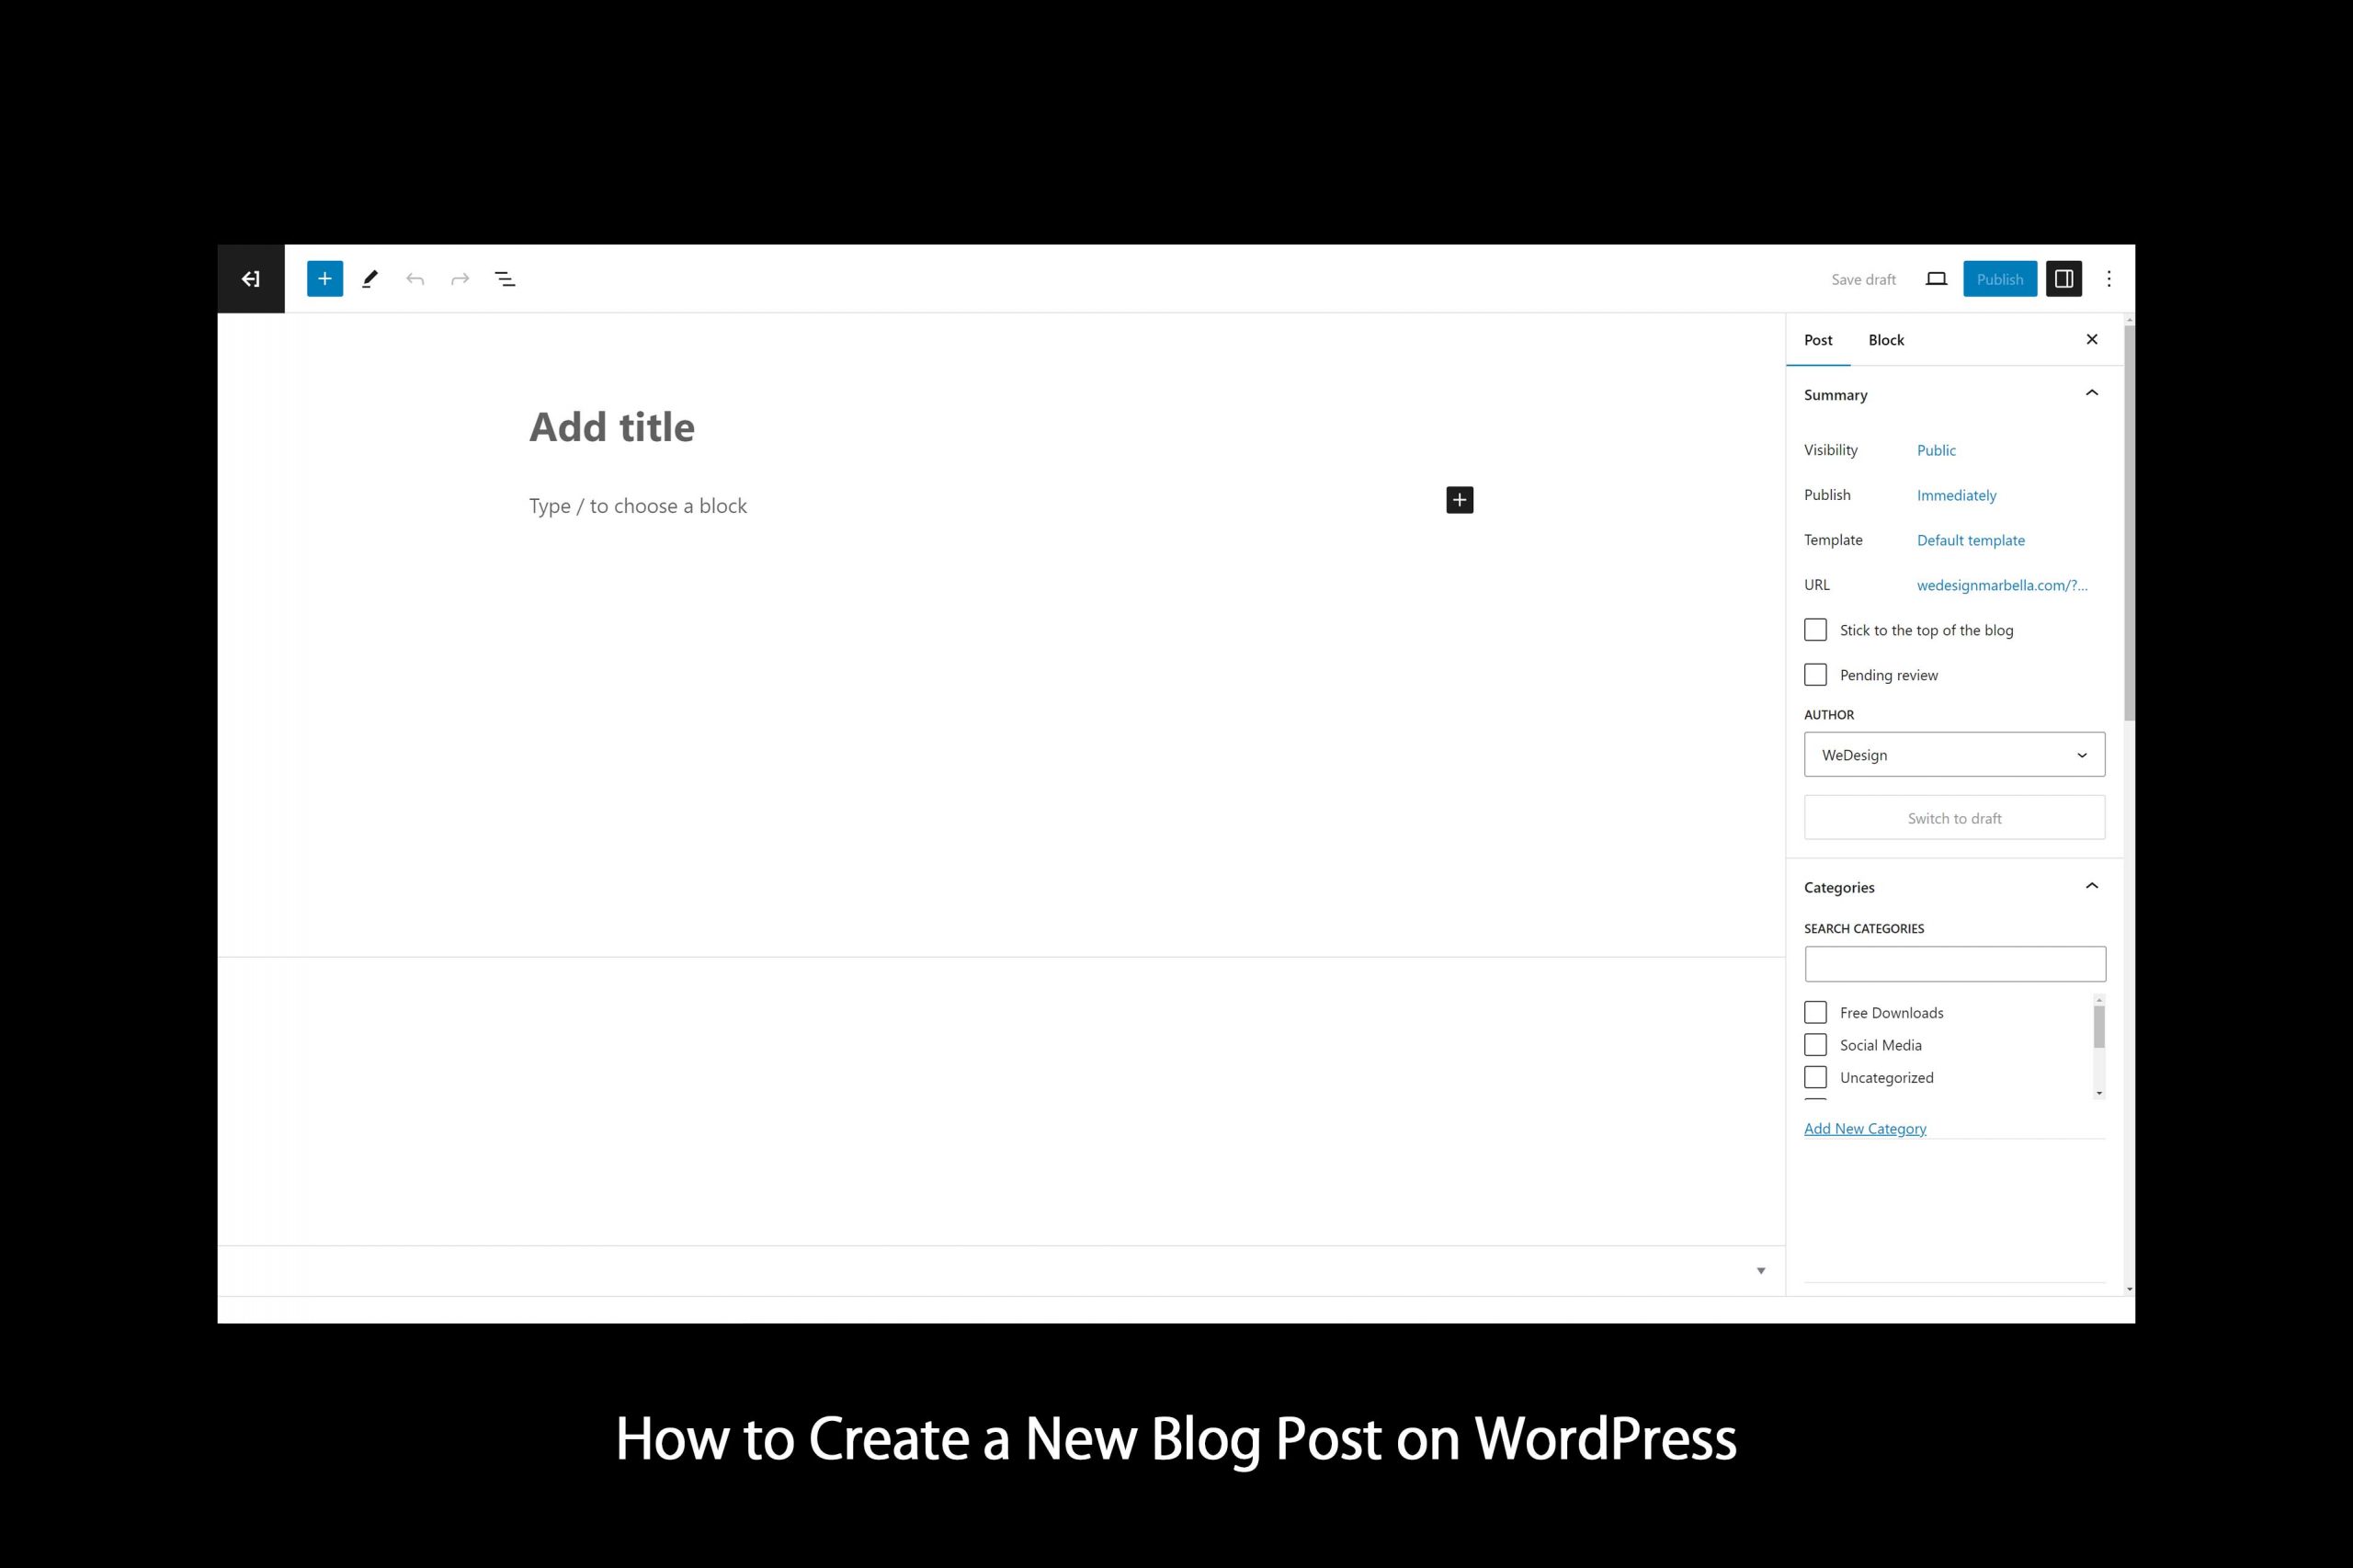 How to Create a New Blog Post on WordPress